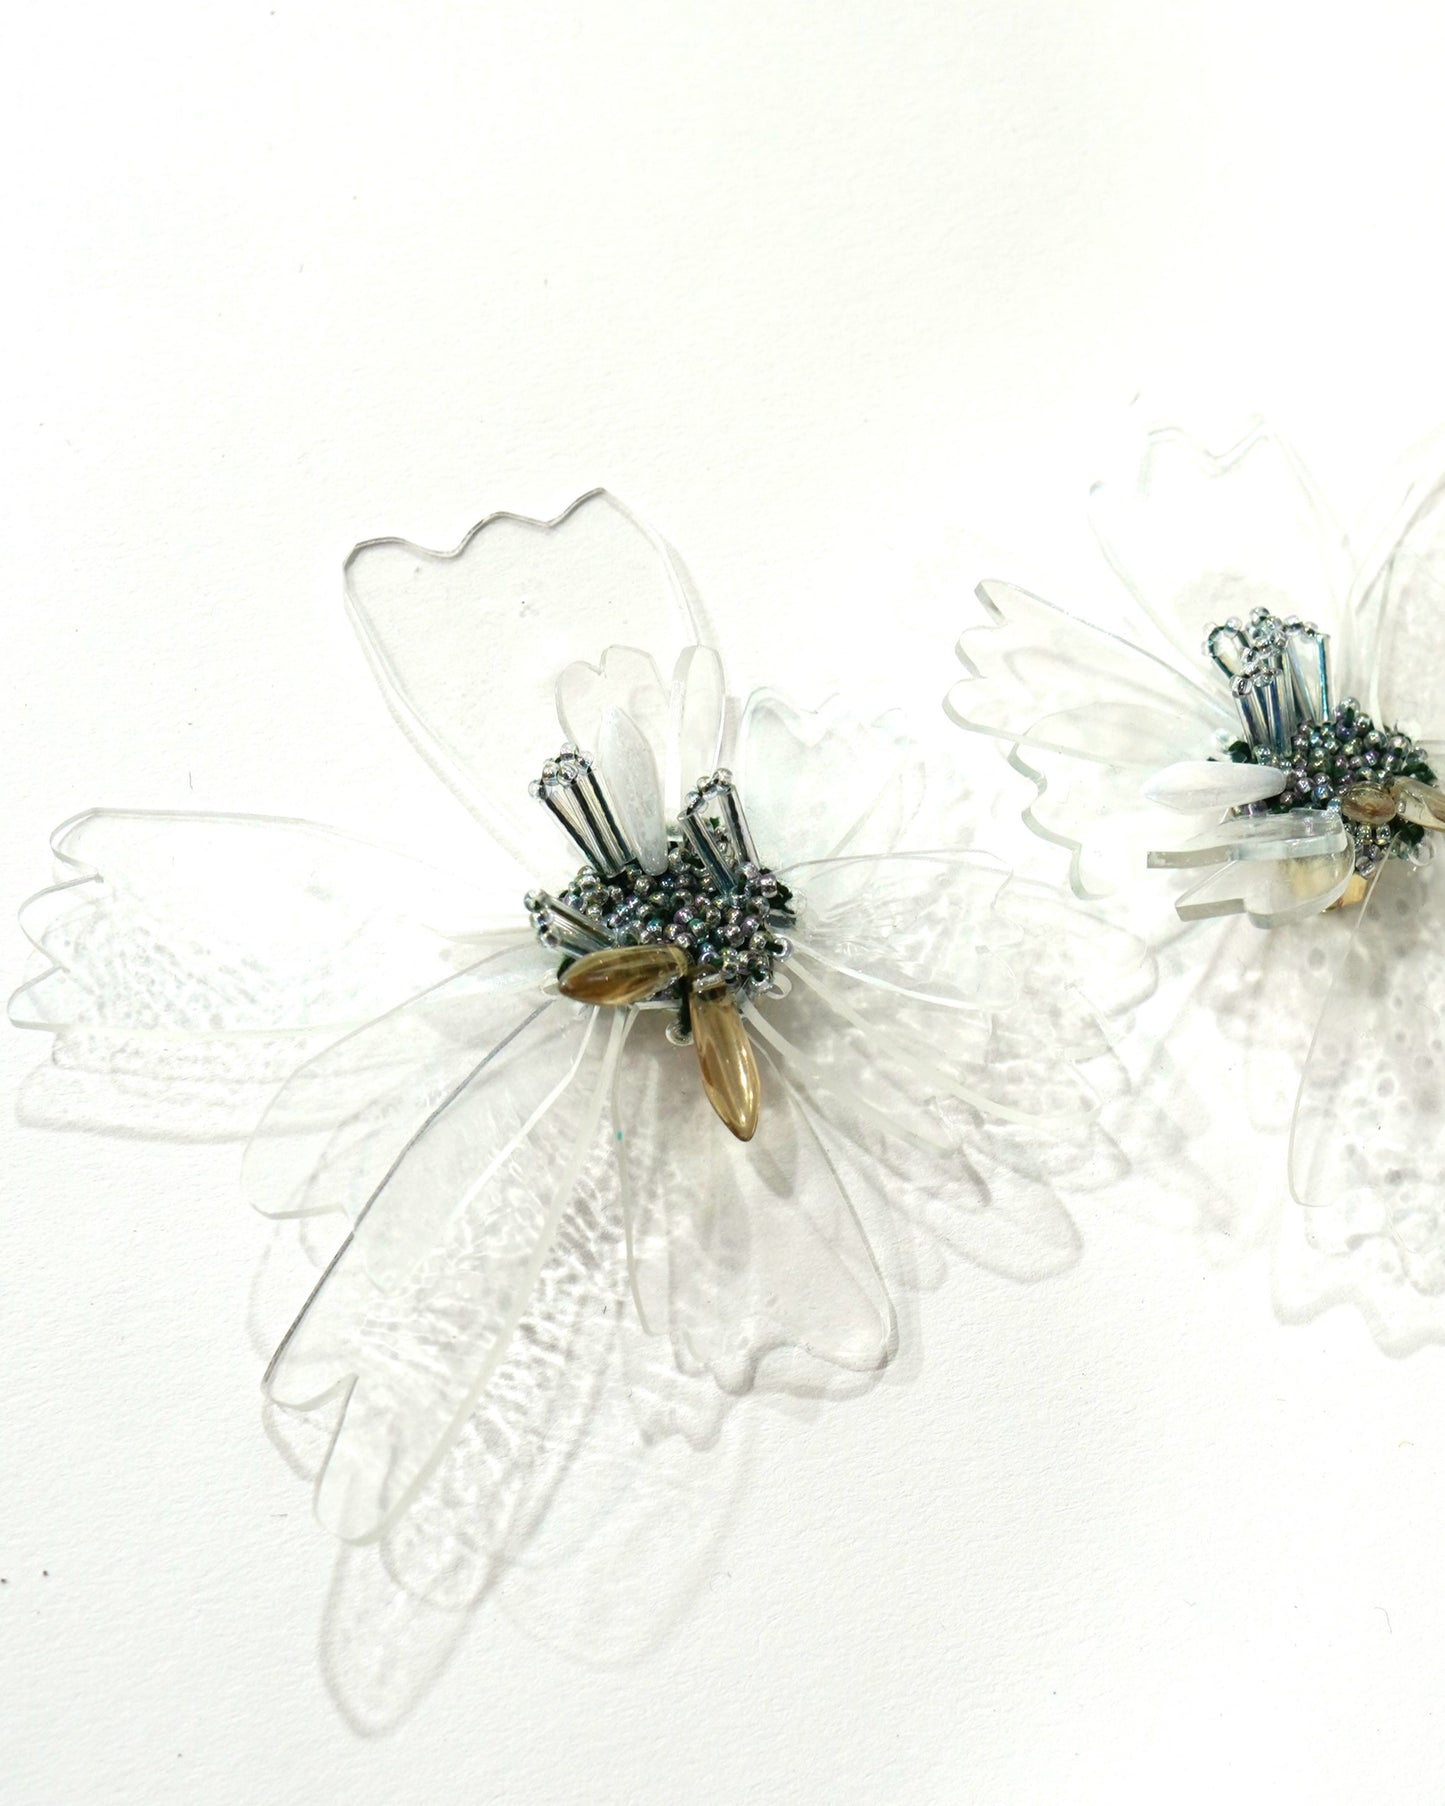 NON TOKYO / CLEAR FLOWER EARRING (CLEAR) / 〈ノントーキョー〉クリアフラワーイヤリング (クリア)